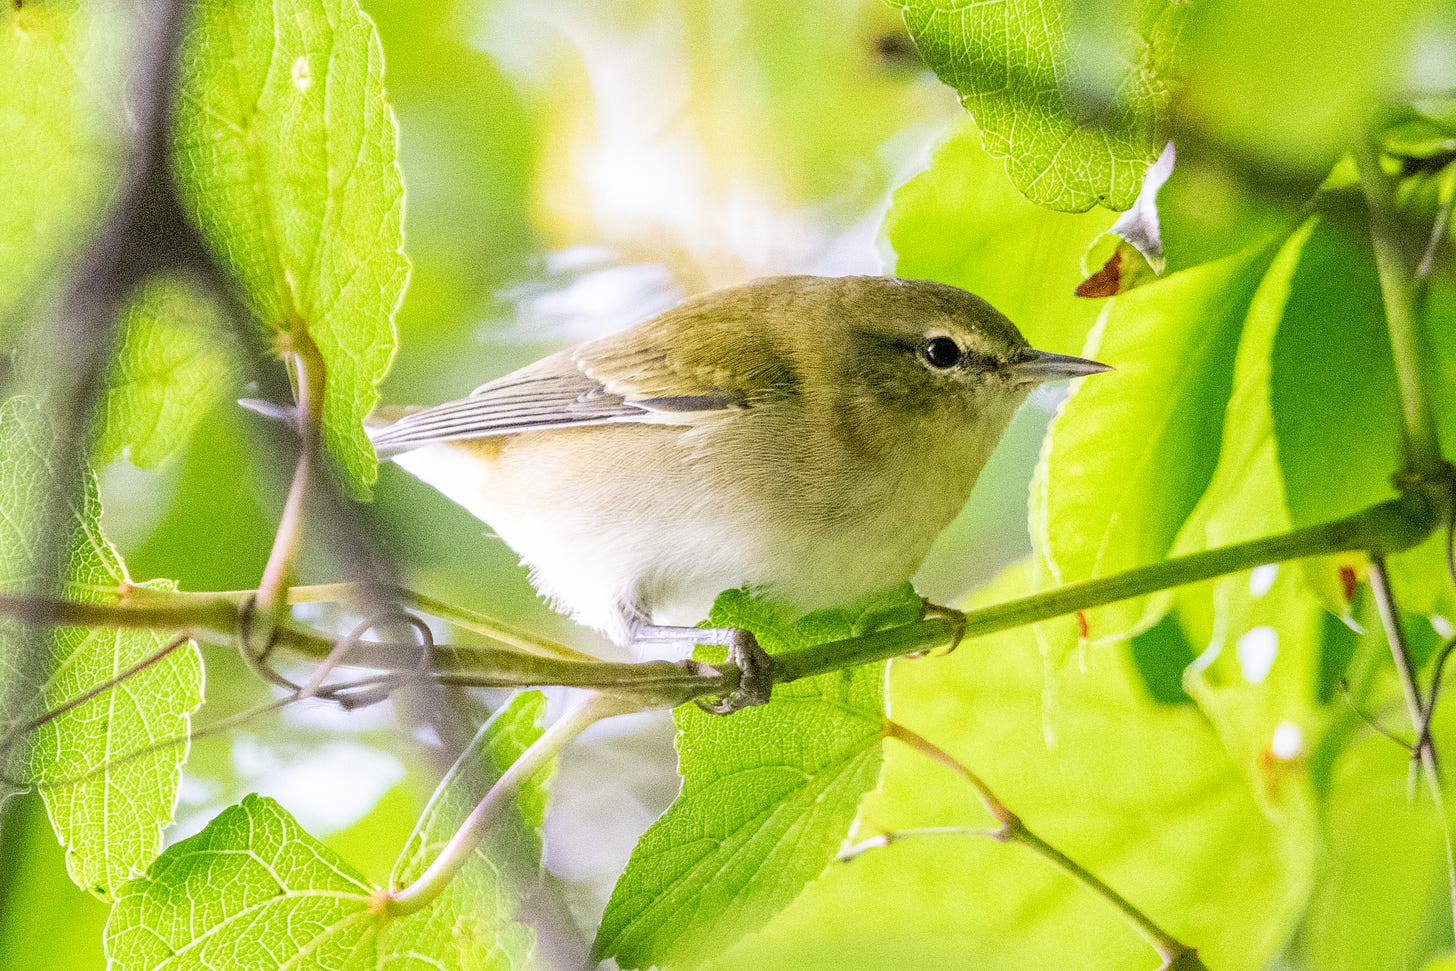 A Tennessee warbler, a small bird with an olive back, no wing bars, and a gray eyeline, is perched on a thin branch